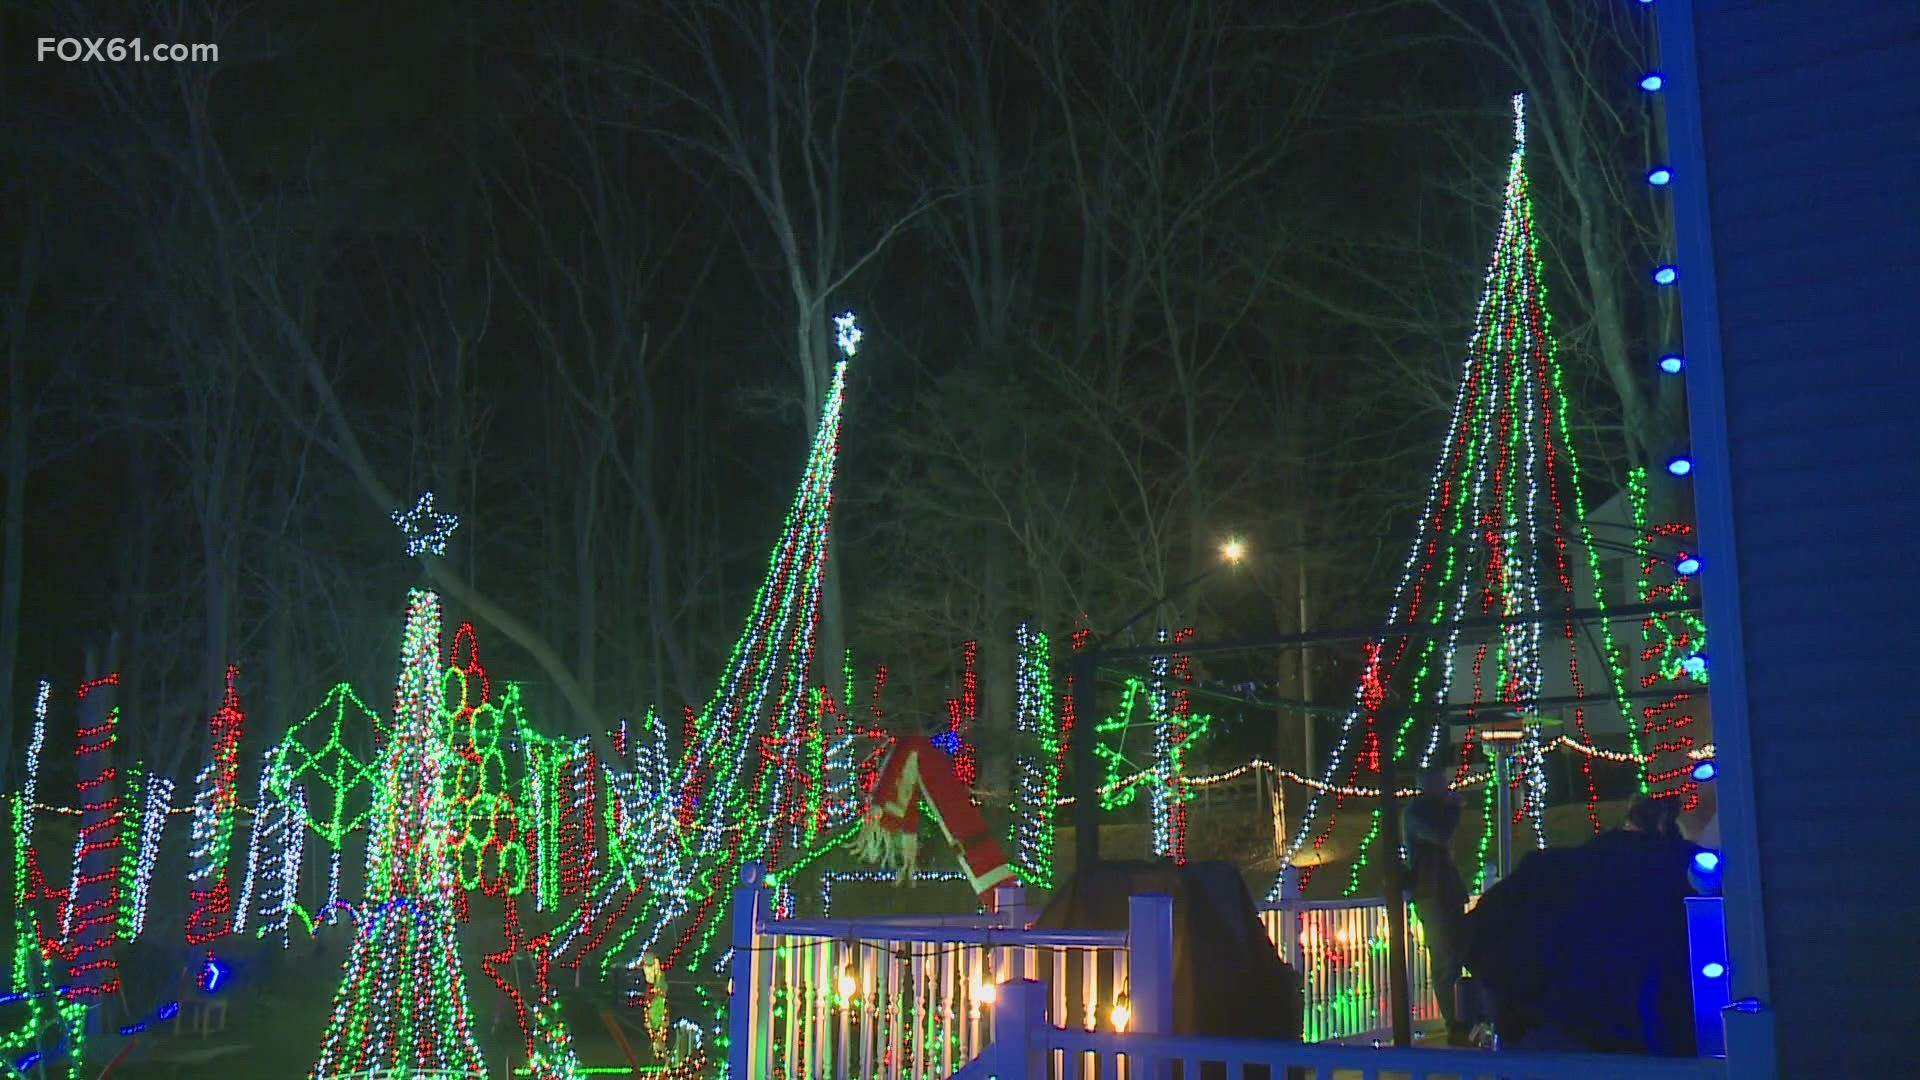 Giant 'Whoville' holiday lights display at Connecticut home